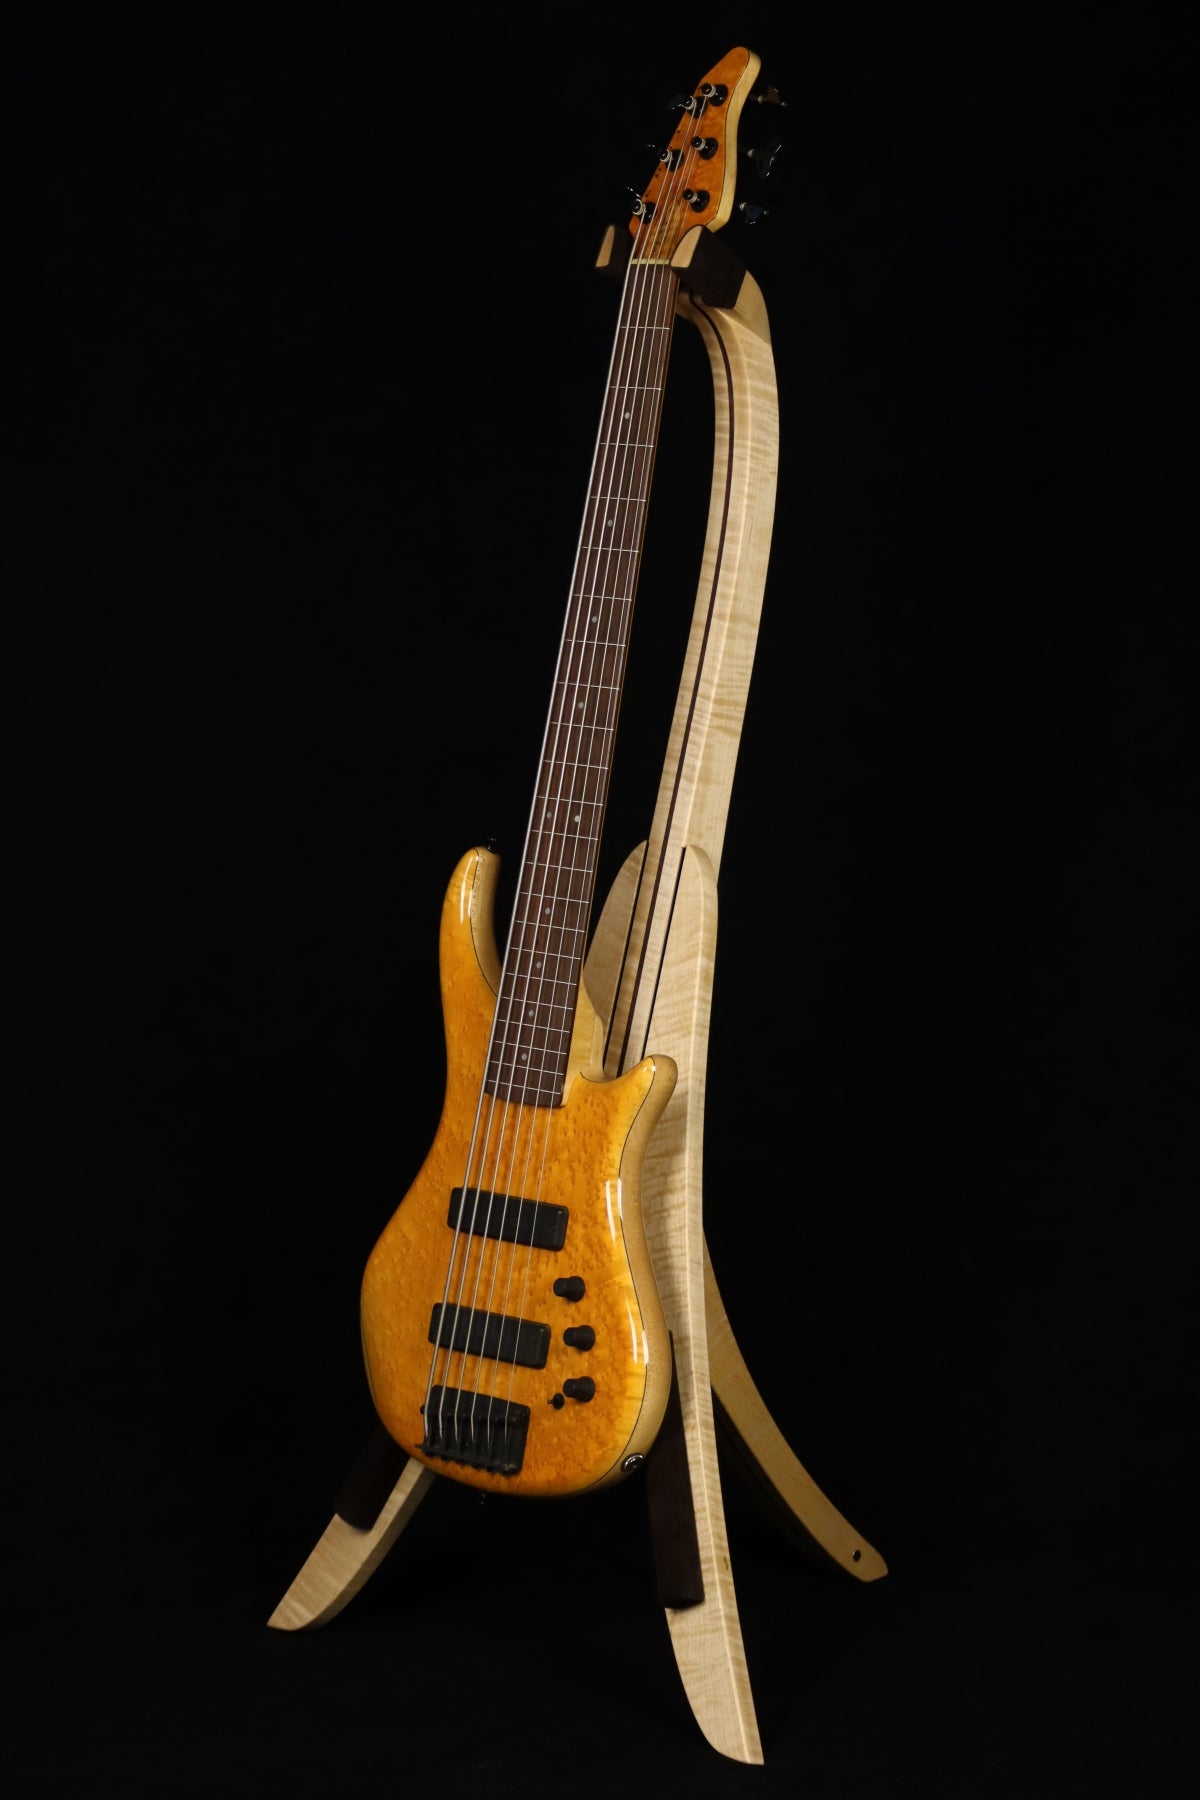 Folding curly maple and walnut wood electric bass guitar floor stand full front image with Pedulla 6 string fretless bass